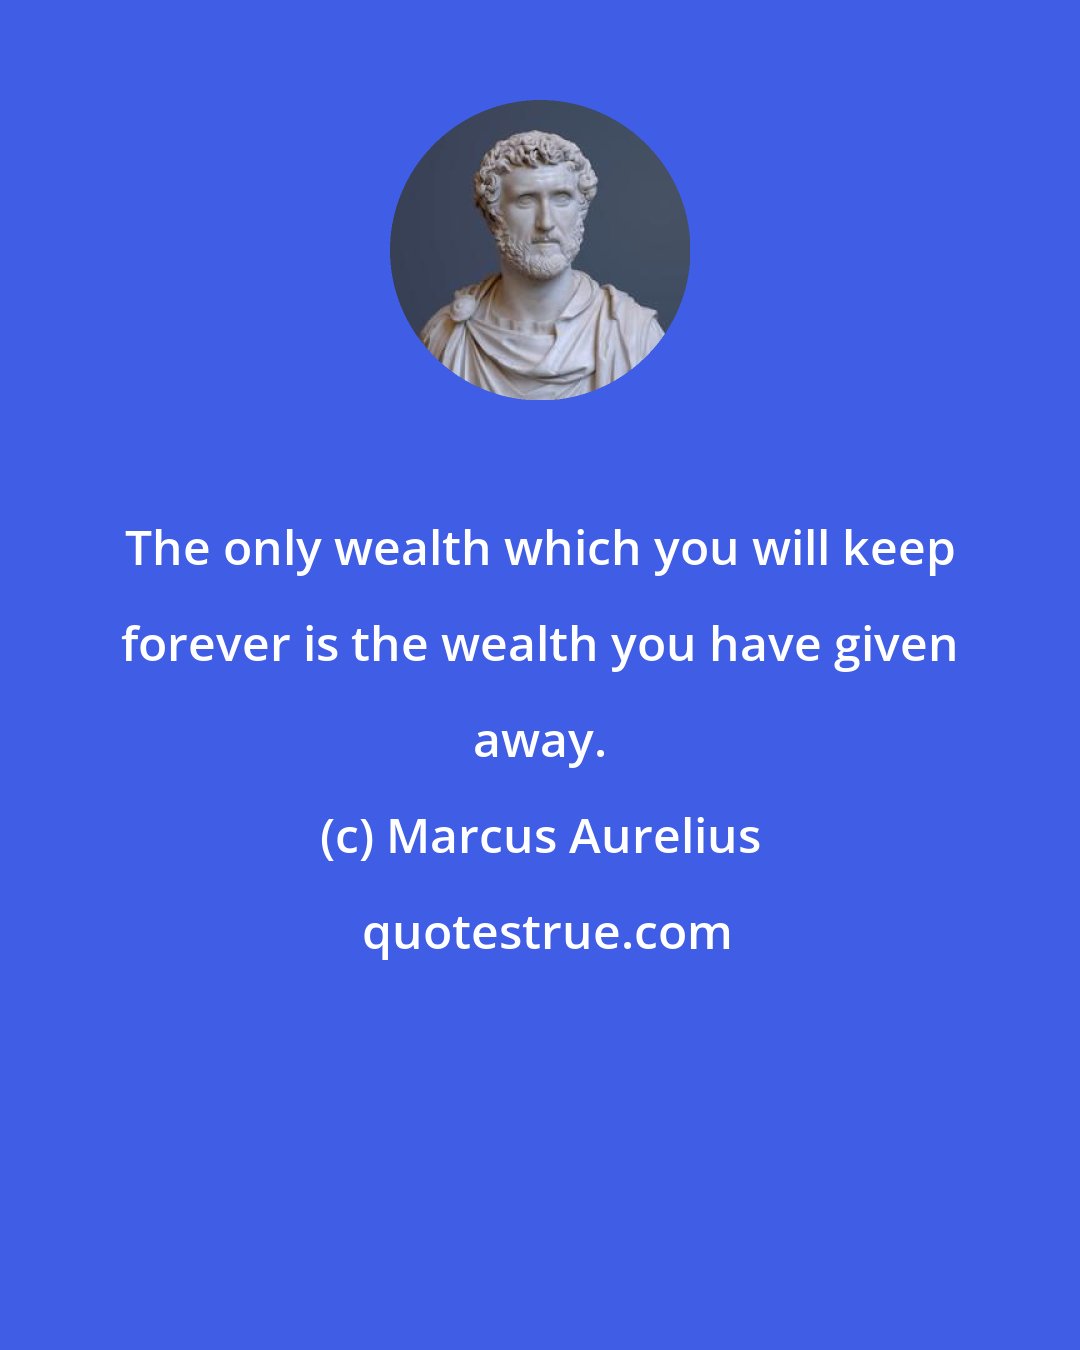 Marcus Aurelius: The only wealth which you will keep forever is the wealth you have given away.